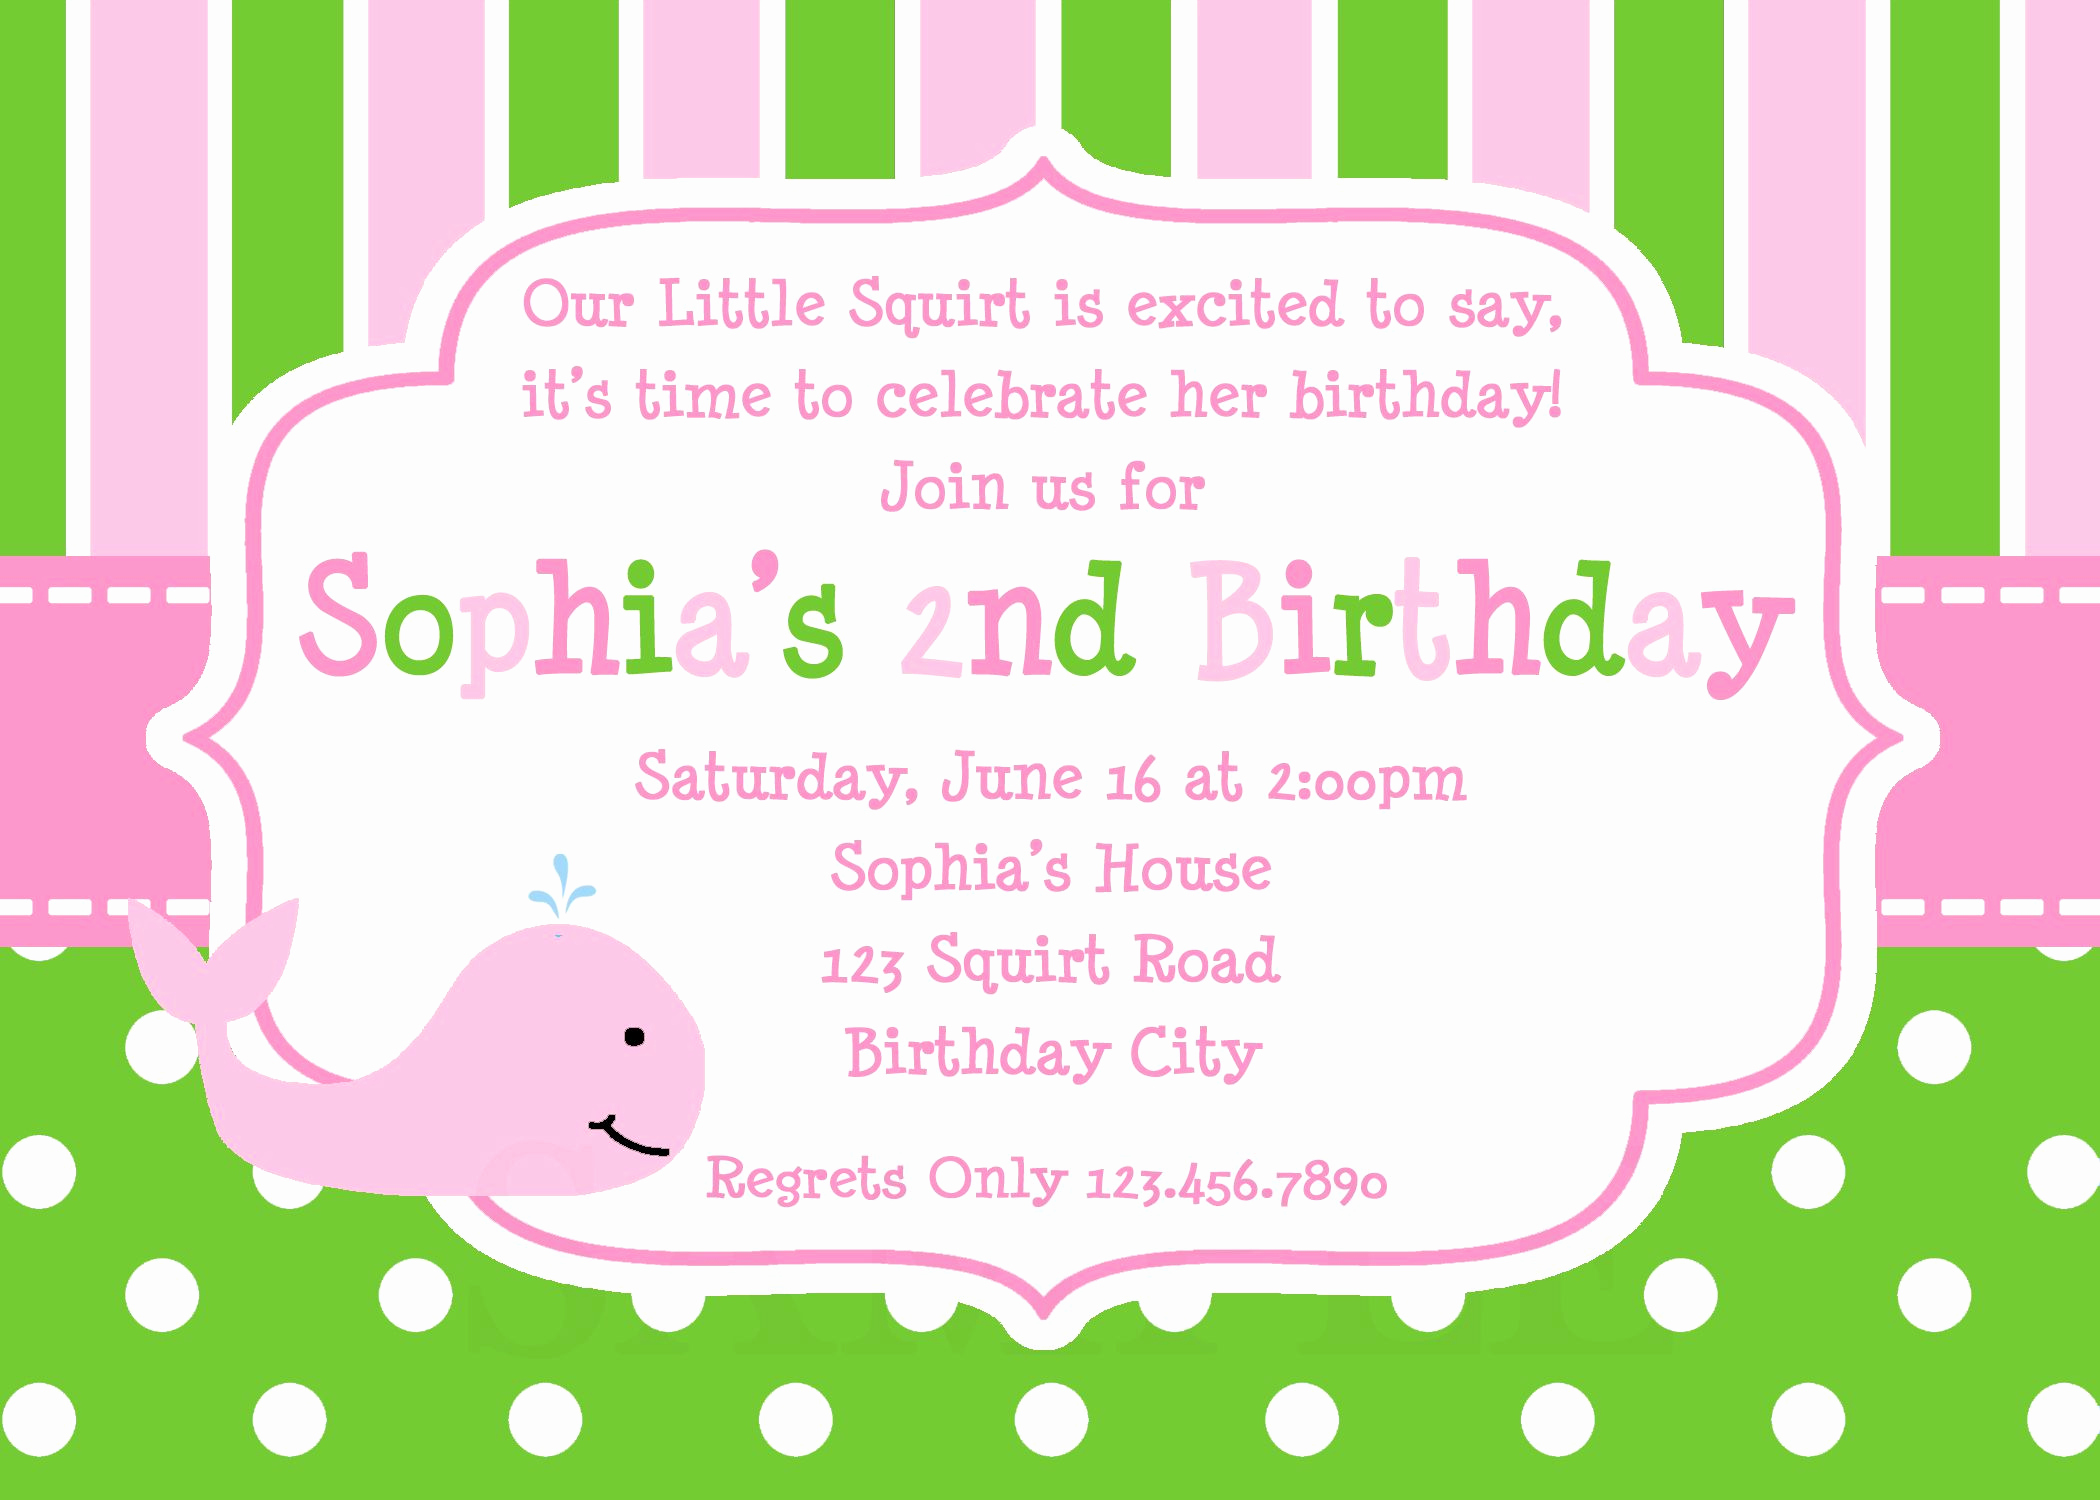 Sample Party Invitation Wording Awesome 21 Kids Birthday Invitation Wording that We Can Make